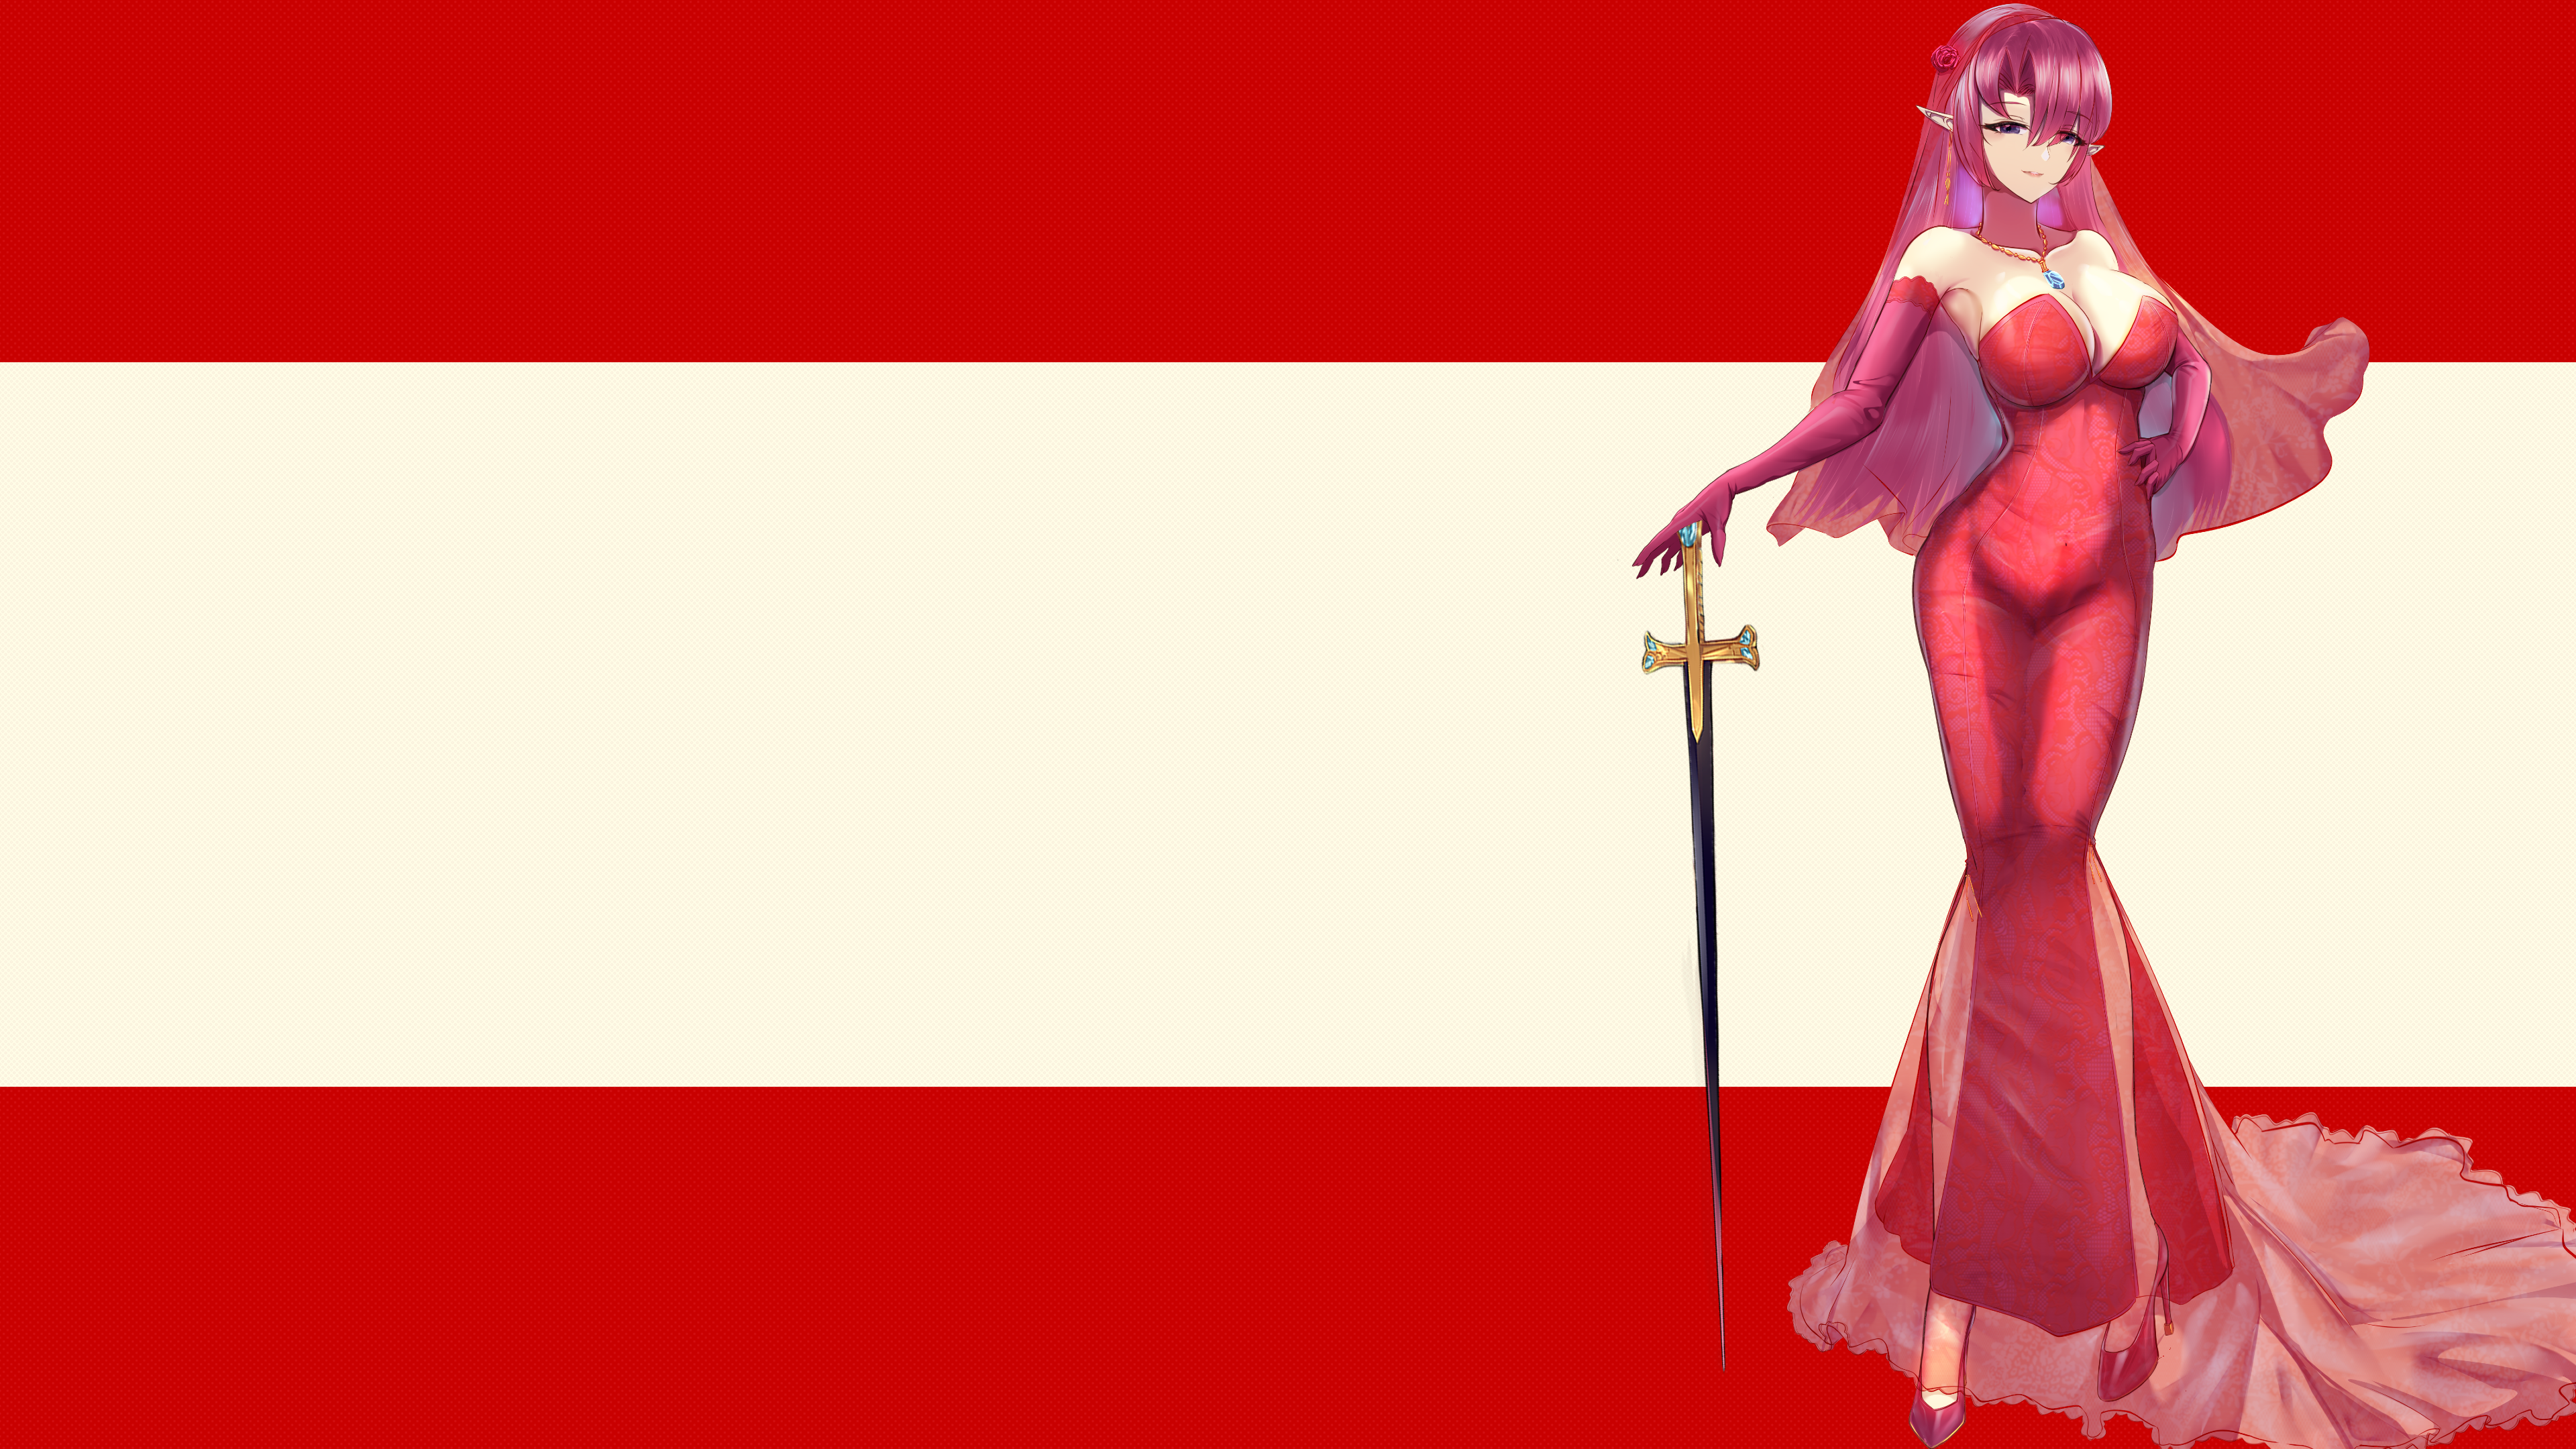 Anime 3840x2160 Duke of York (Azur Lane) Azur Lane alternate costume bare shoulders gemstone necklace cleavage elbow gloves gloves satin gloves pink gloves hands on hips sword heels high heels lace sheer clothing big boobs looking at viewer long hair necklace between boobs purple hair hair ornament pointy ears purple eyes pink dress red shoes strapless dress smiling tight dress tight clothing veils anime girls simple background bright